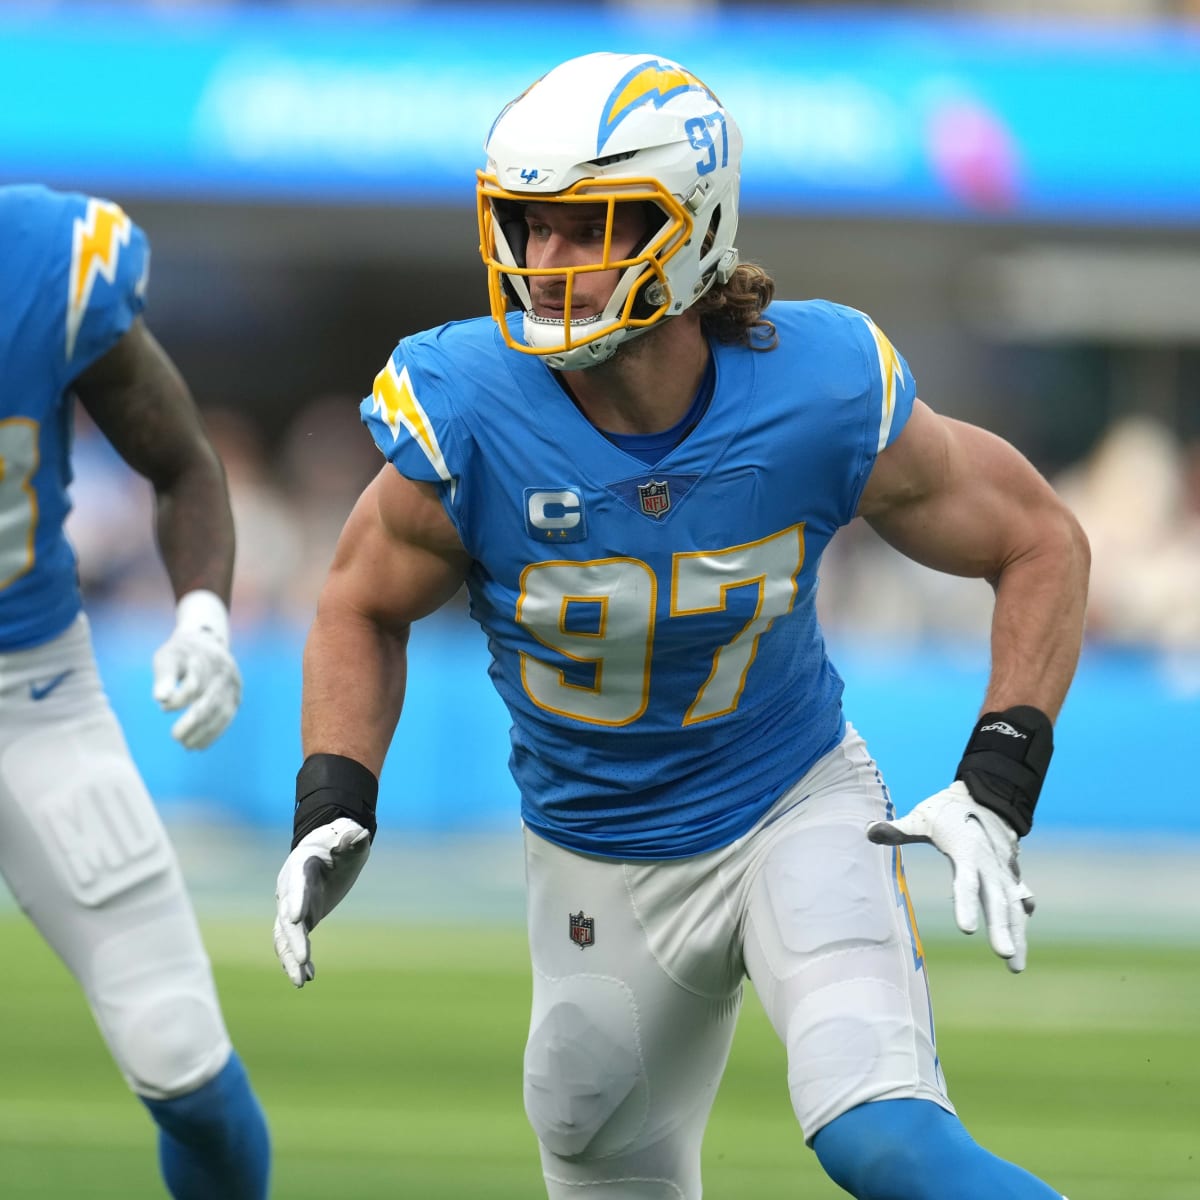 Joey Bosa embraces Chargers' new, complex defense – Orange County